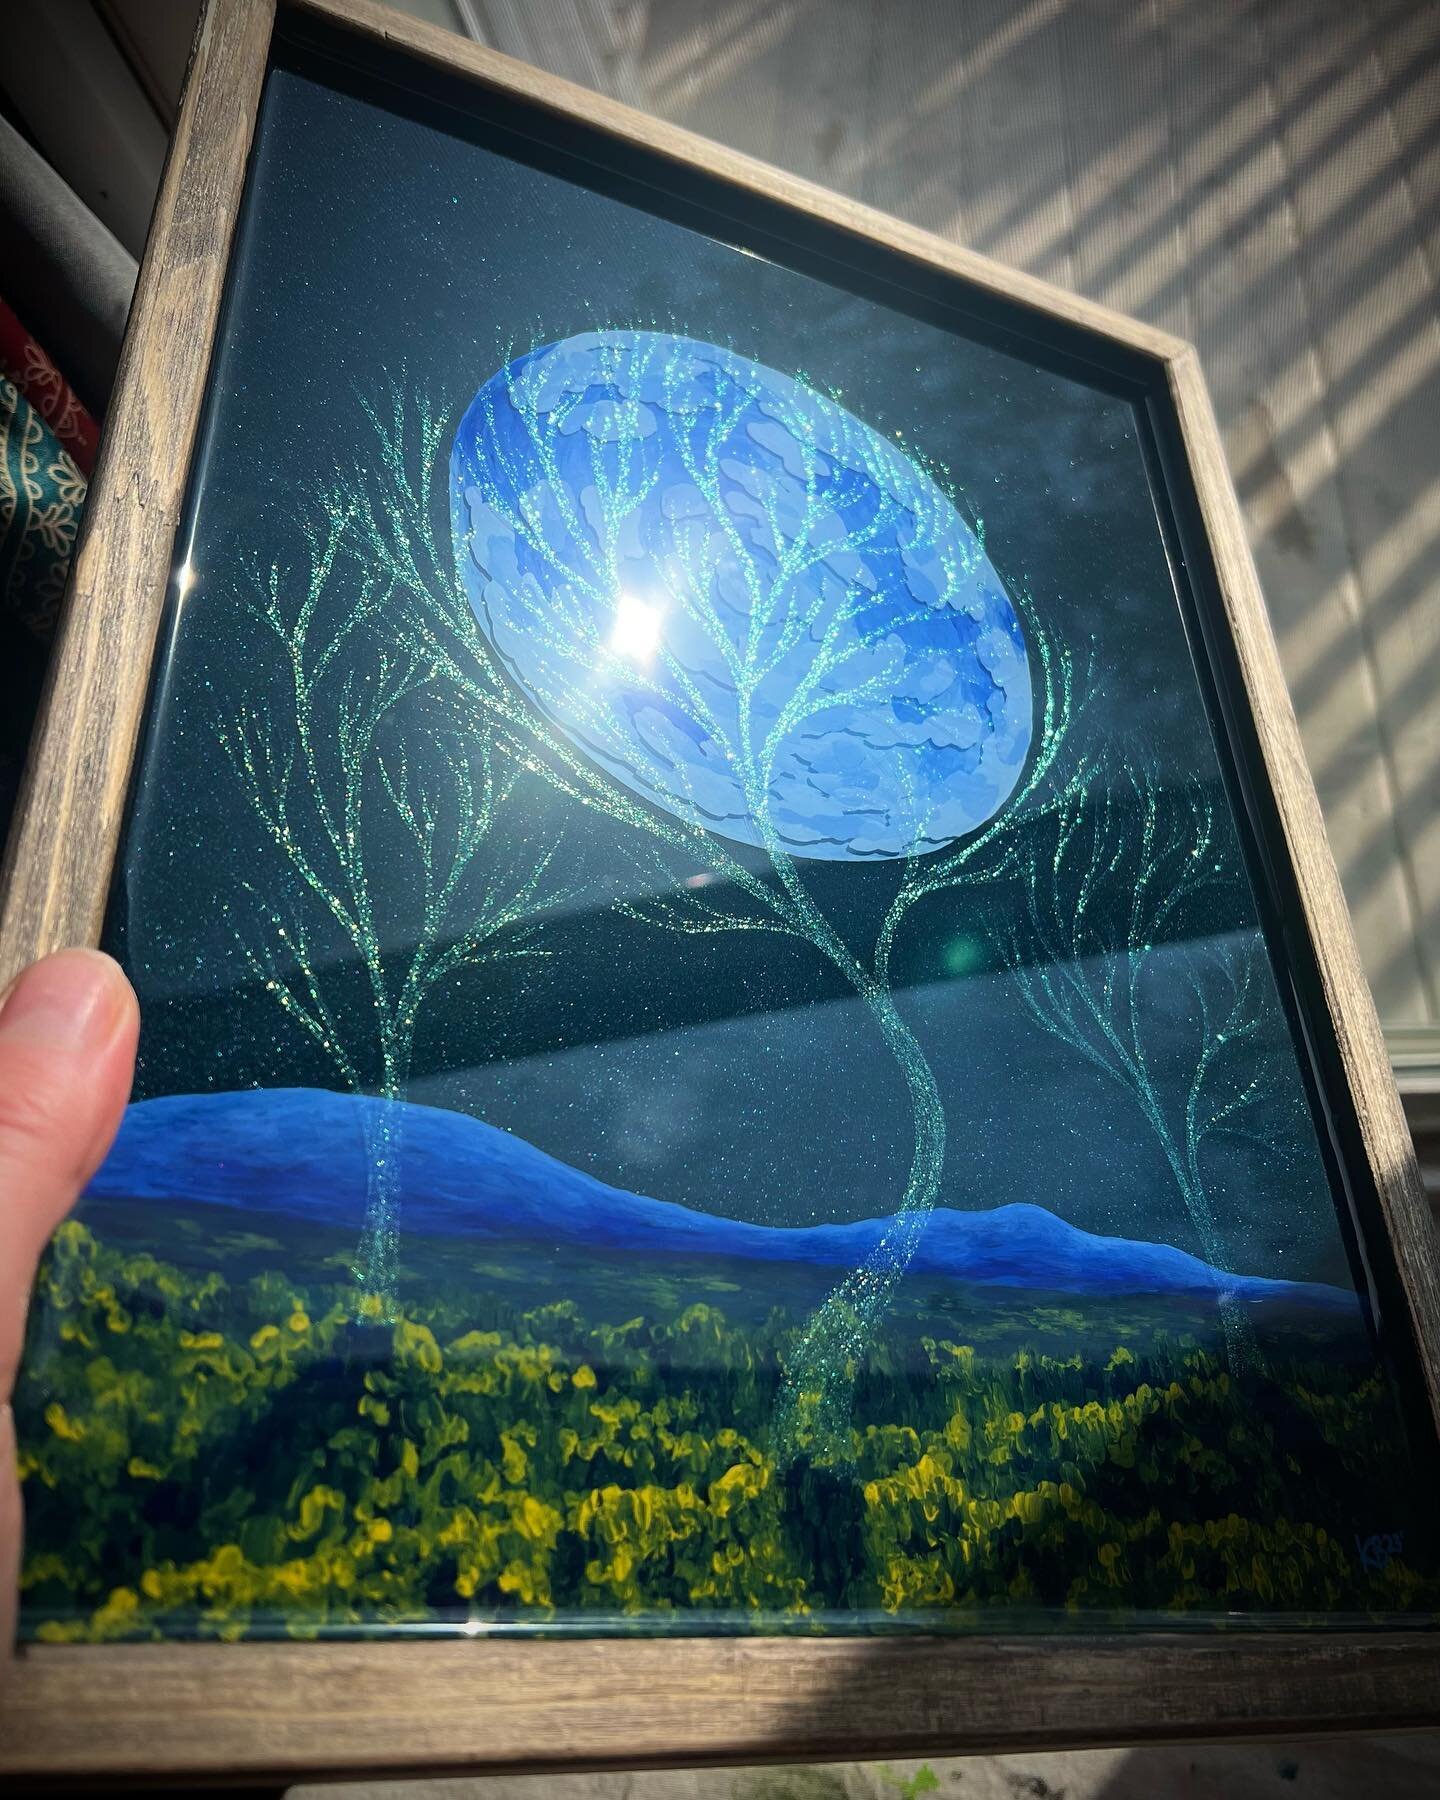 &ldquo;Whisper in the Night&rdquo;
Resin &amp; Acrylic on Wood
11&rdquo;x14&rdquo;
🌳SOLD🌝
Inspired by the poem &ldquo;Trees&rdquo; by Jamie Parsley - Poem attached in photos
@jamieaparsley